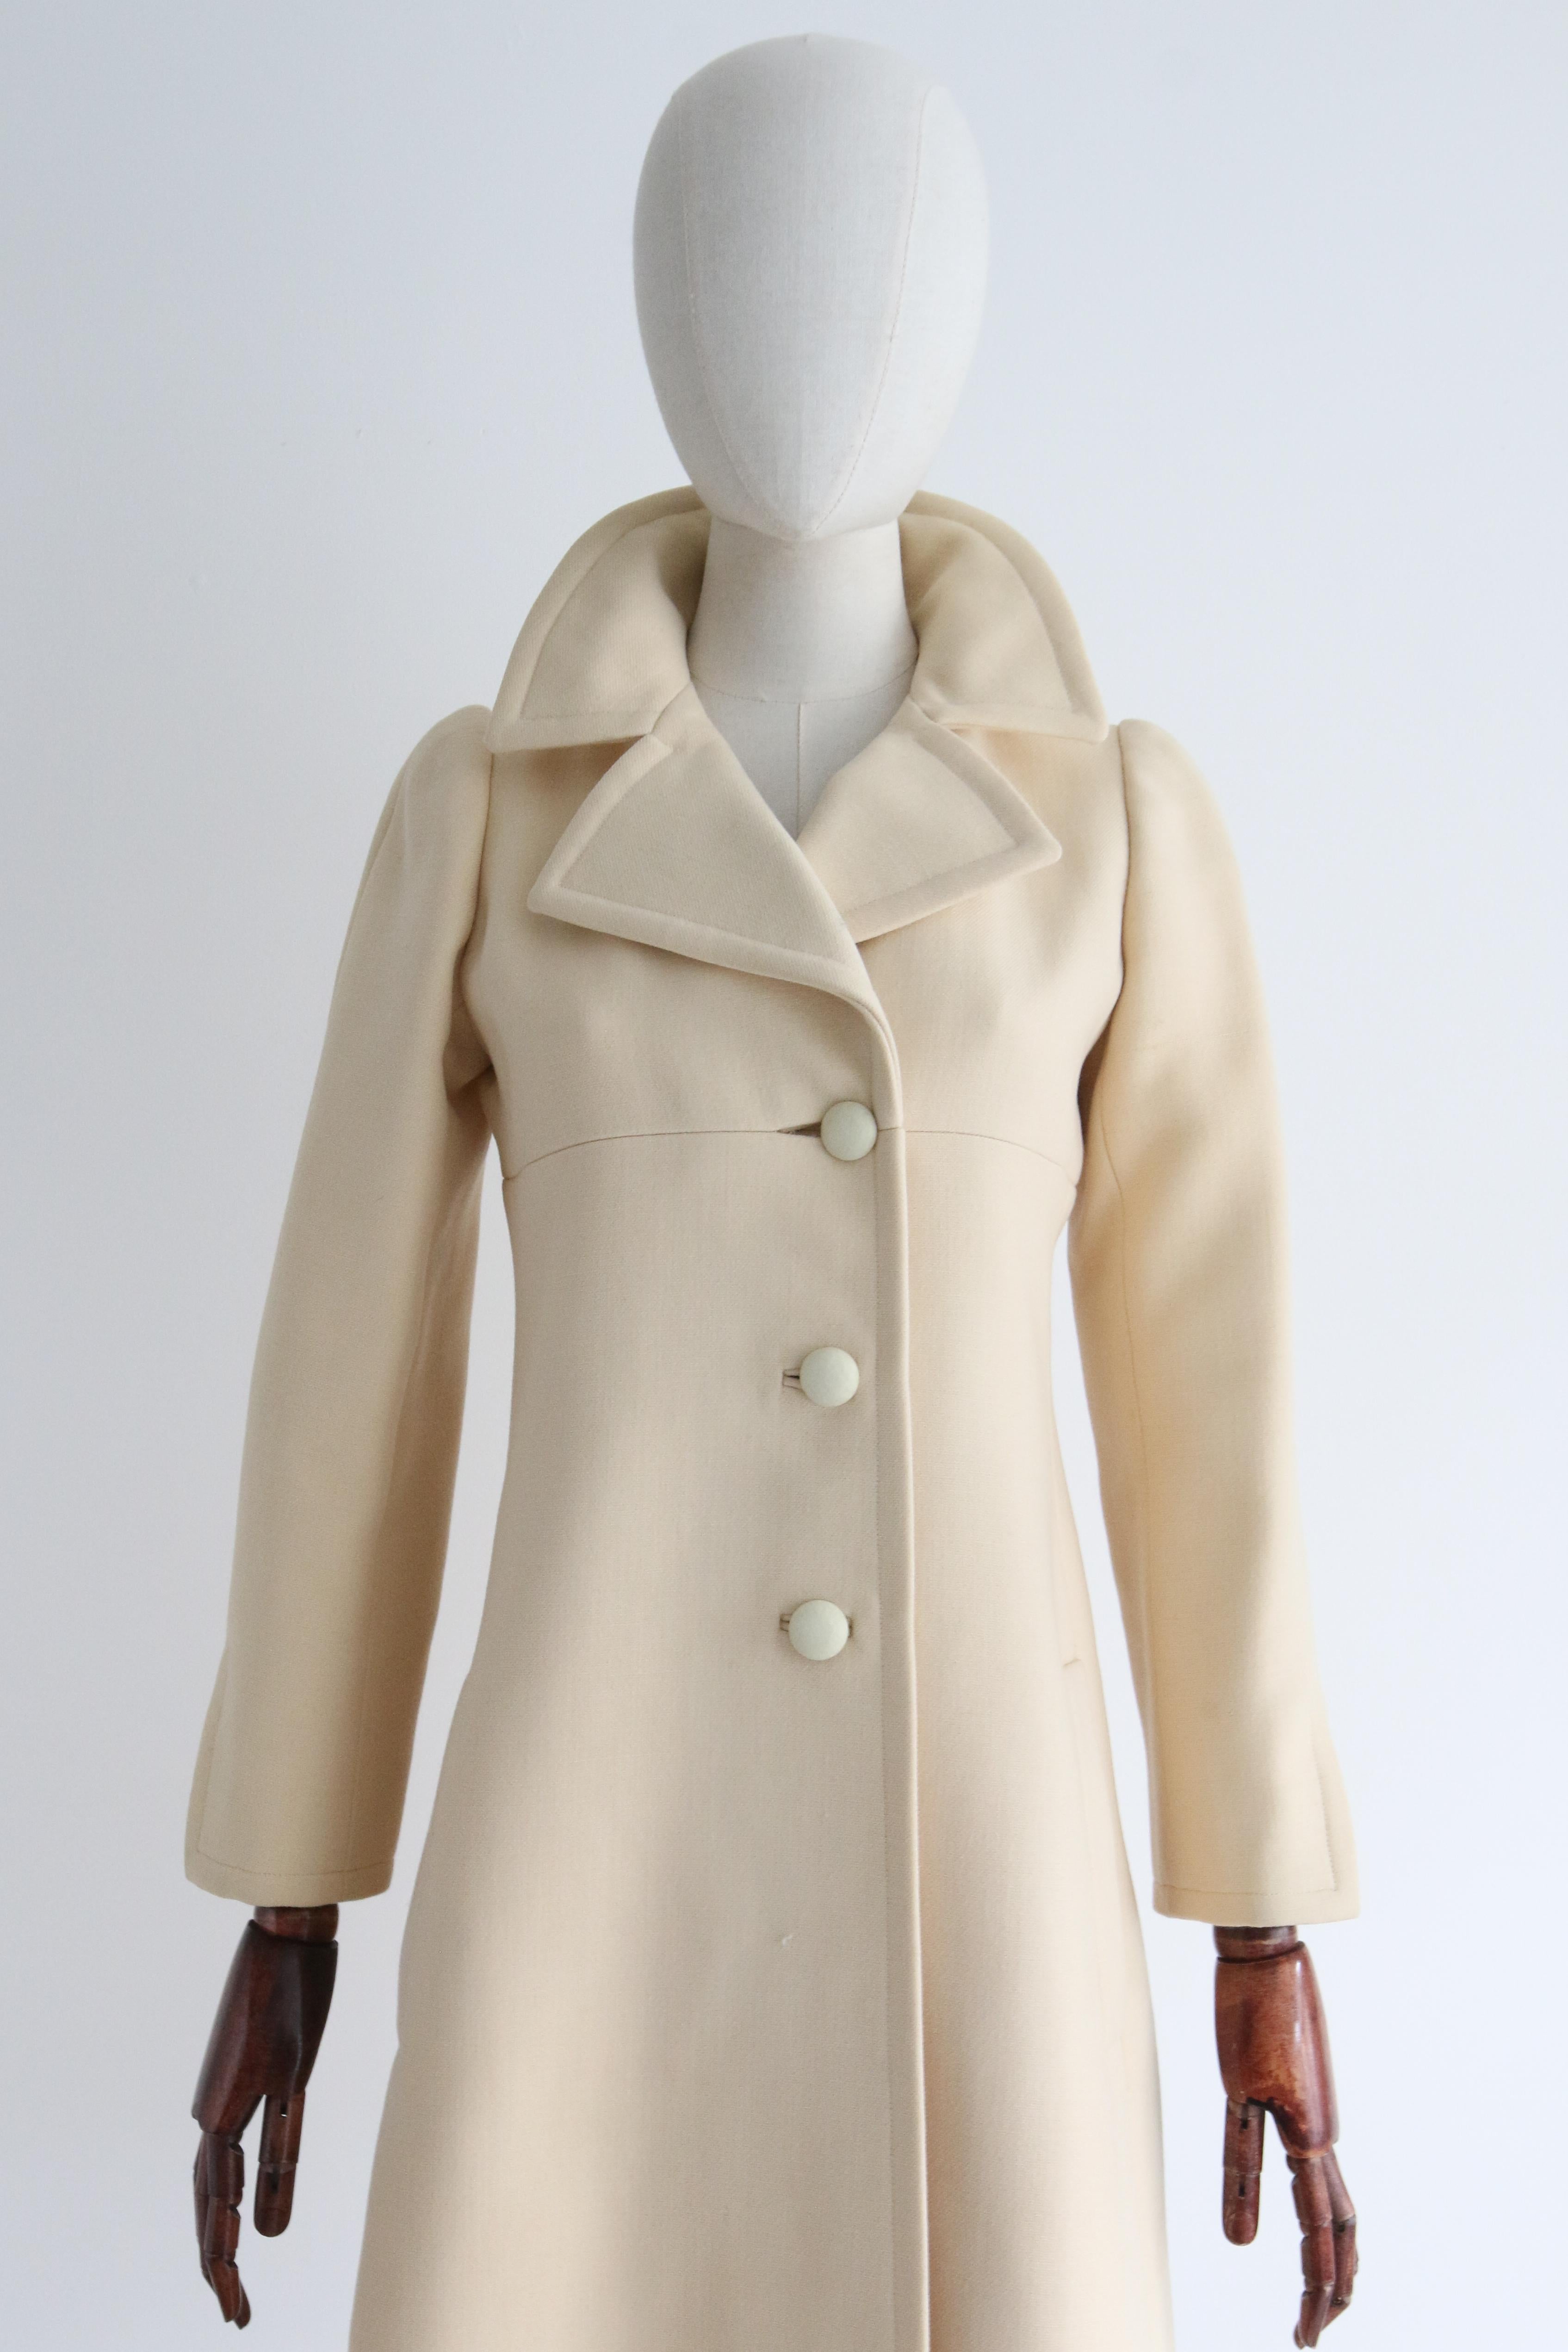 A rare and unique piece to behold, this original vintage 1960's Yves Saint Laurent Coat, Rendered in a cream wool and lined in silk, is just the piece to add to your couture collection and seasonal wardrobe.

The wide notched pointed collar frames